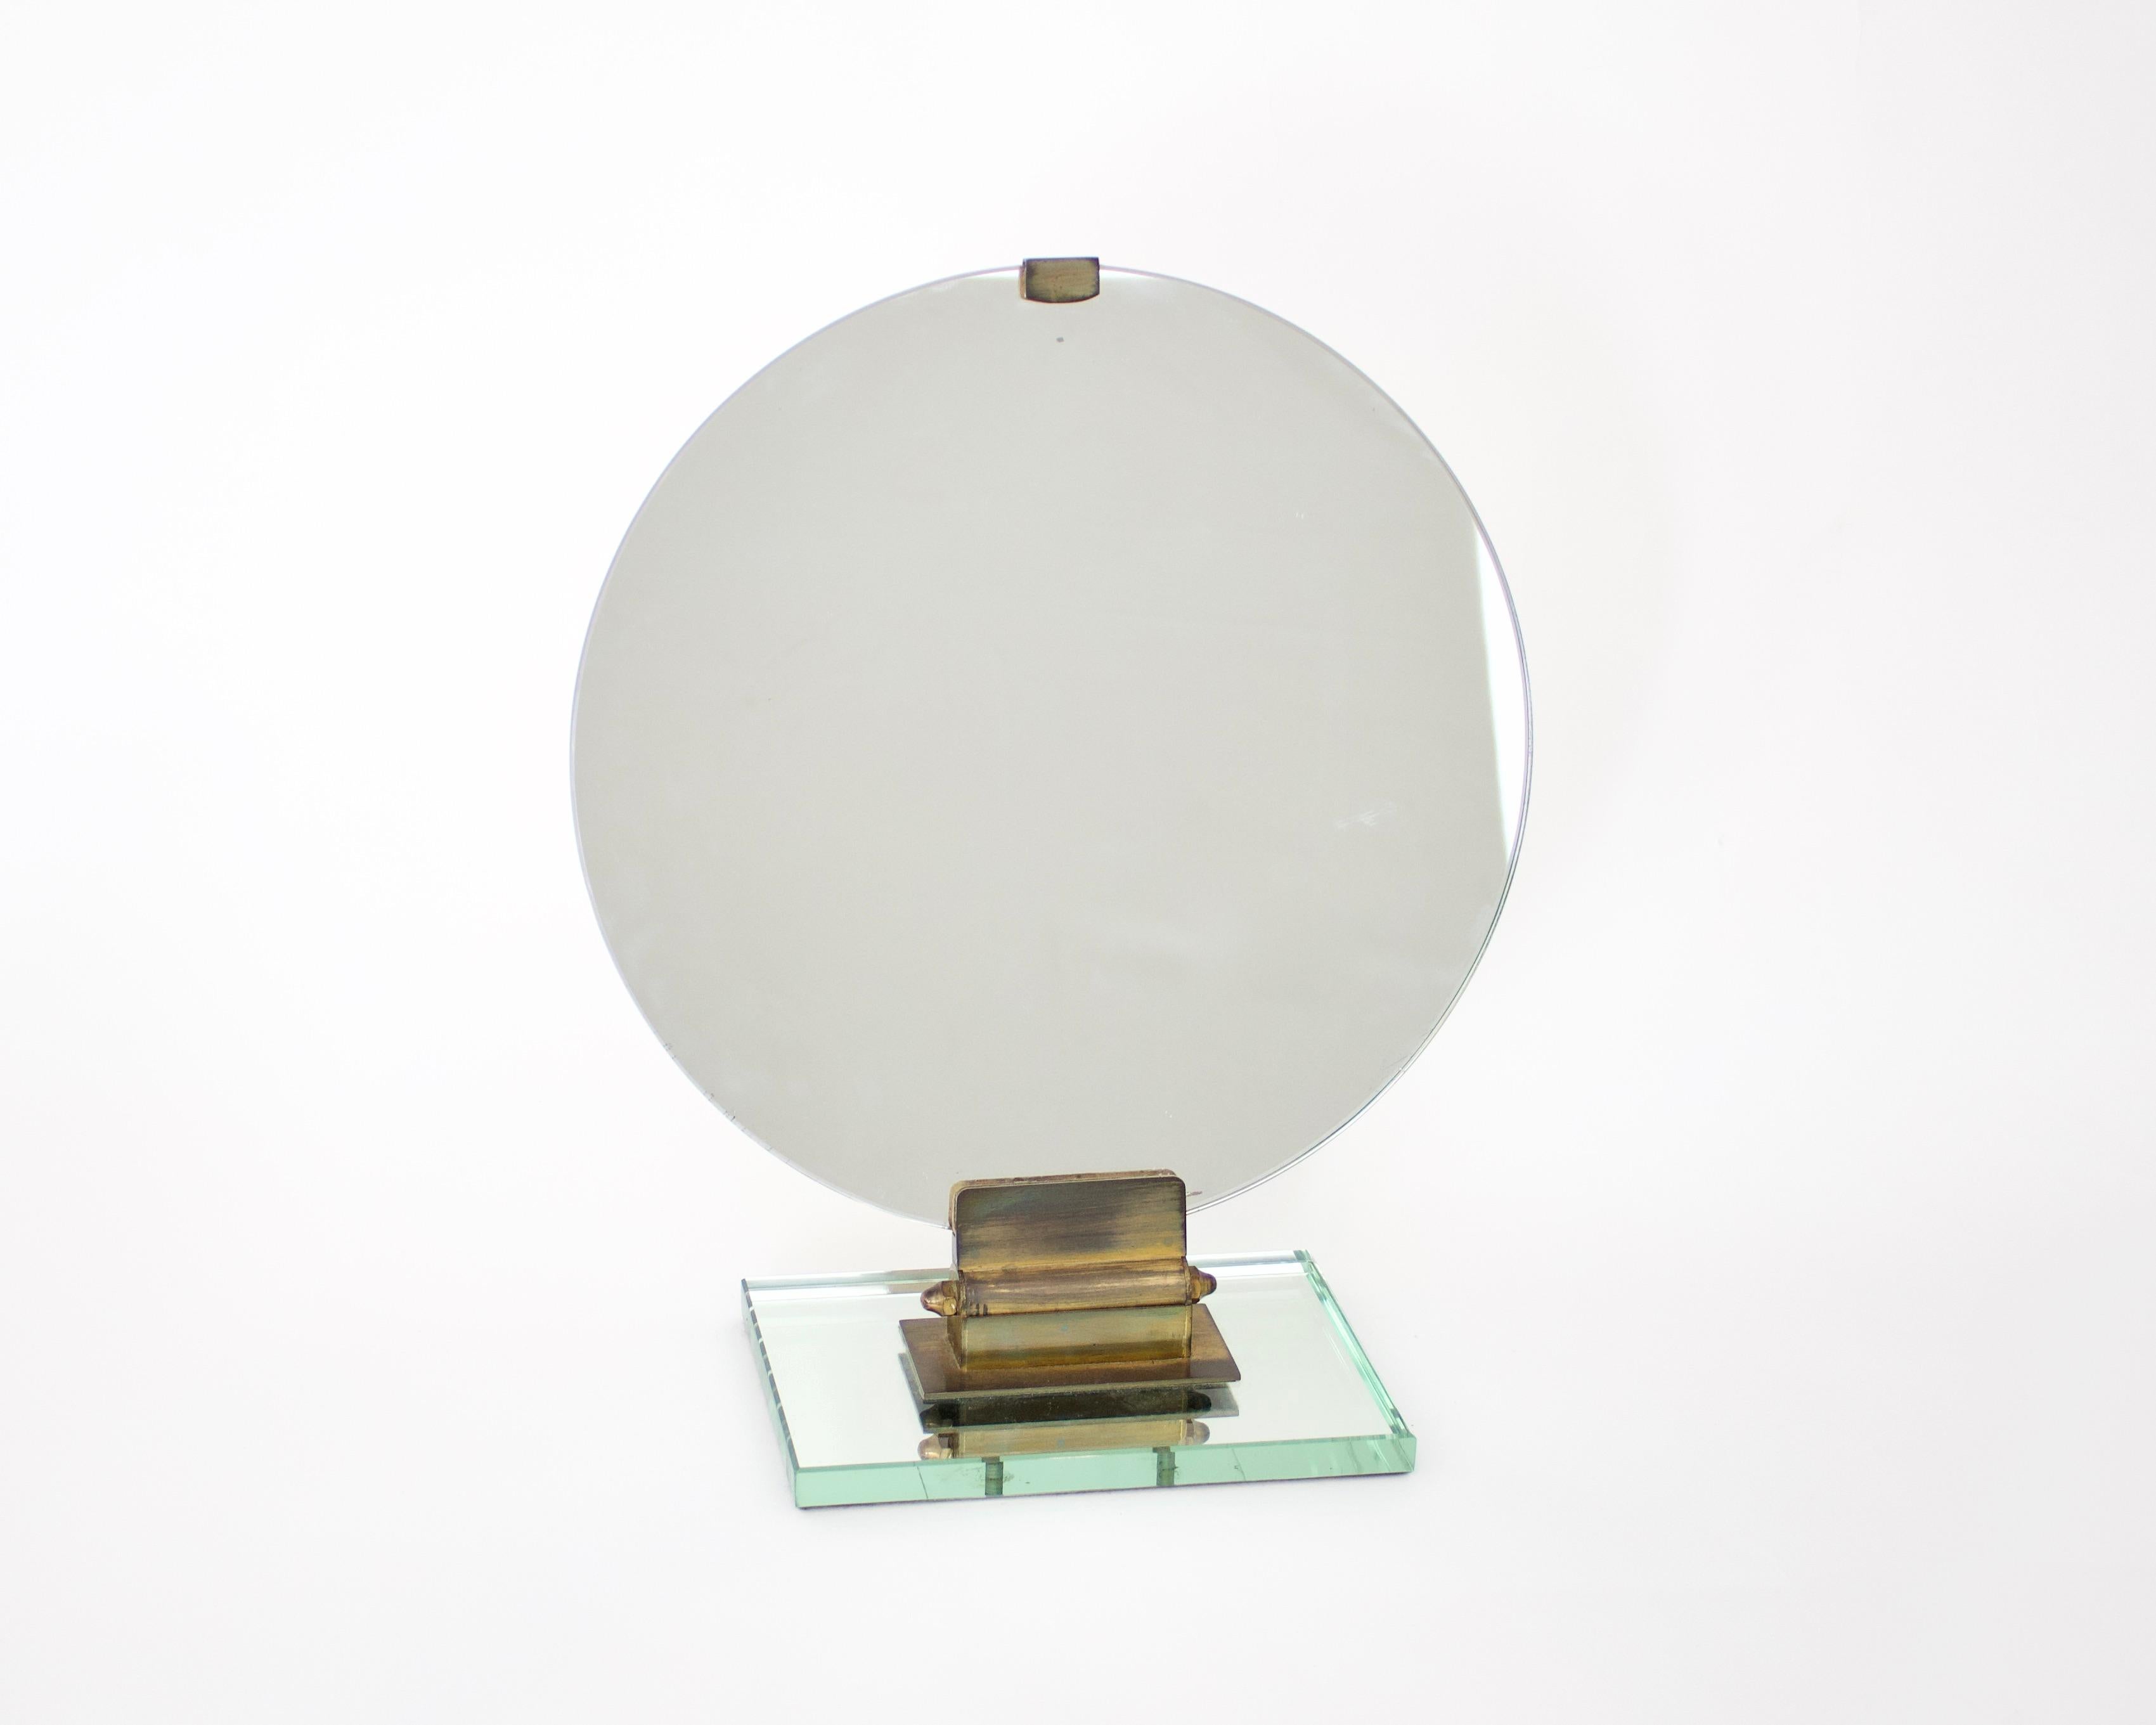 A chic Jacques Adnet French vanity mirror or dresser mirror in original glass with bronze base and details sitting on a perfect beveled fotnatna arte mirrored glass base. No chips or flaws to the mirror. The mirror is 13” diameter. 
15.75